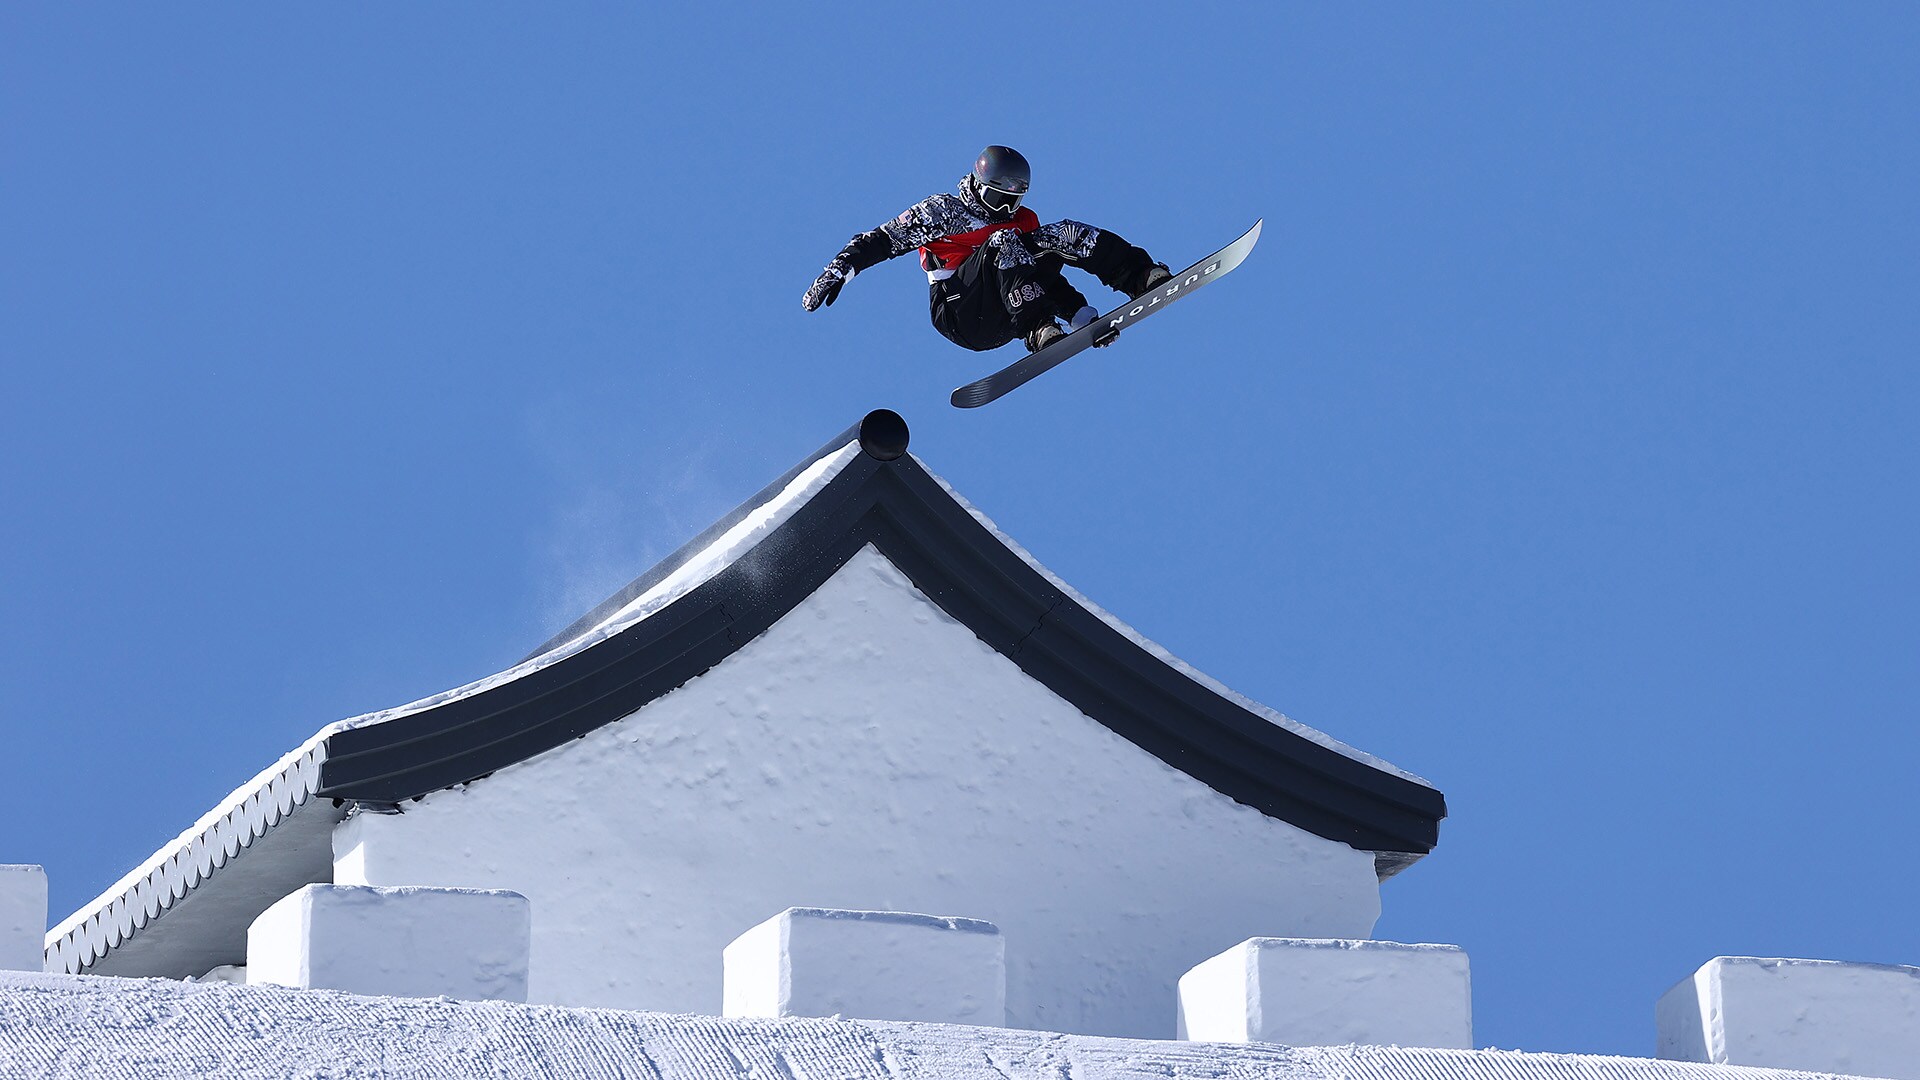 Mens snowboard slopestyle final preview Gerard aims to defend title